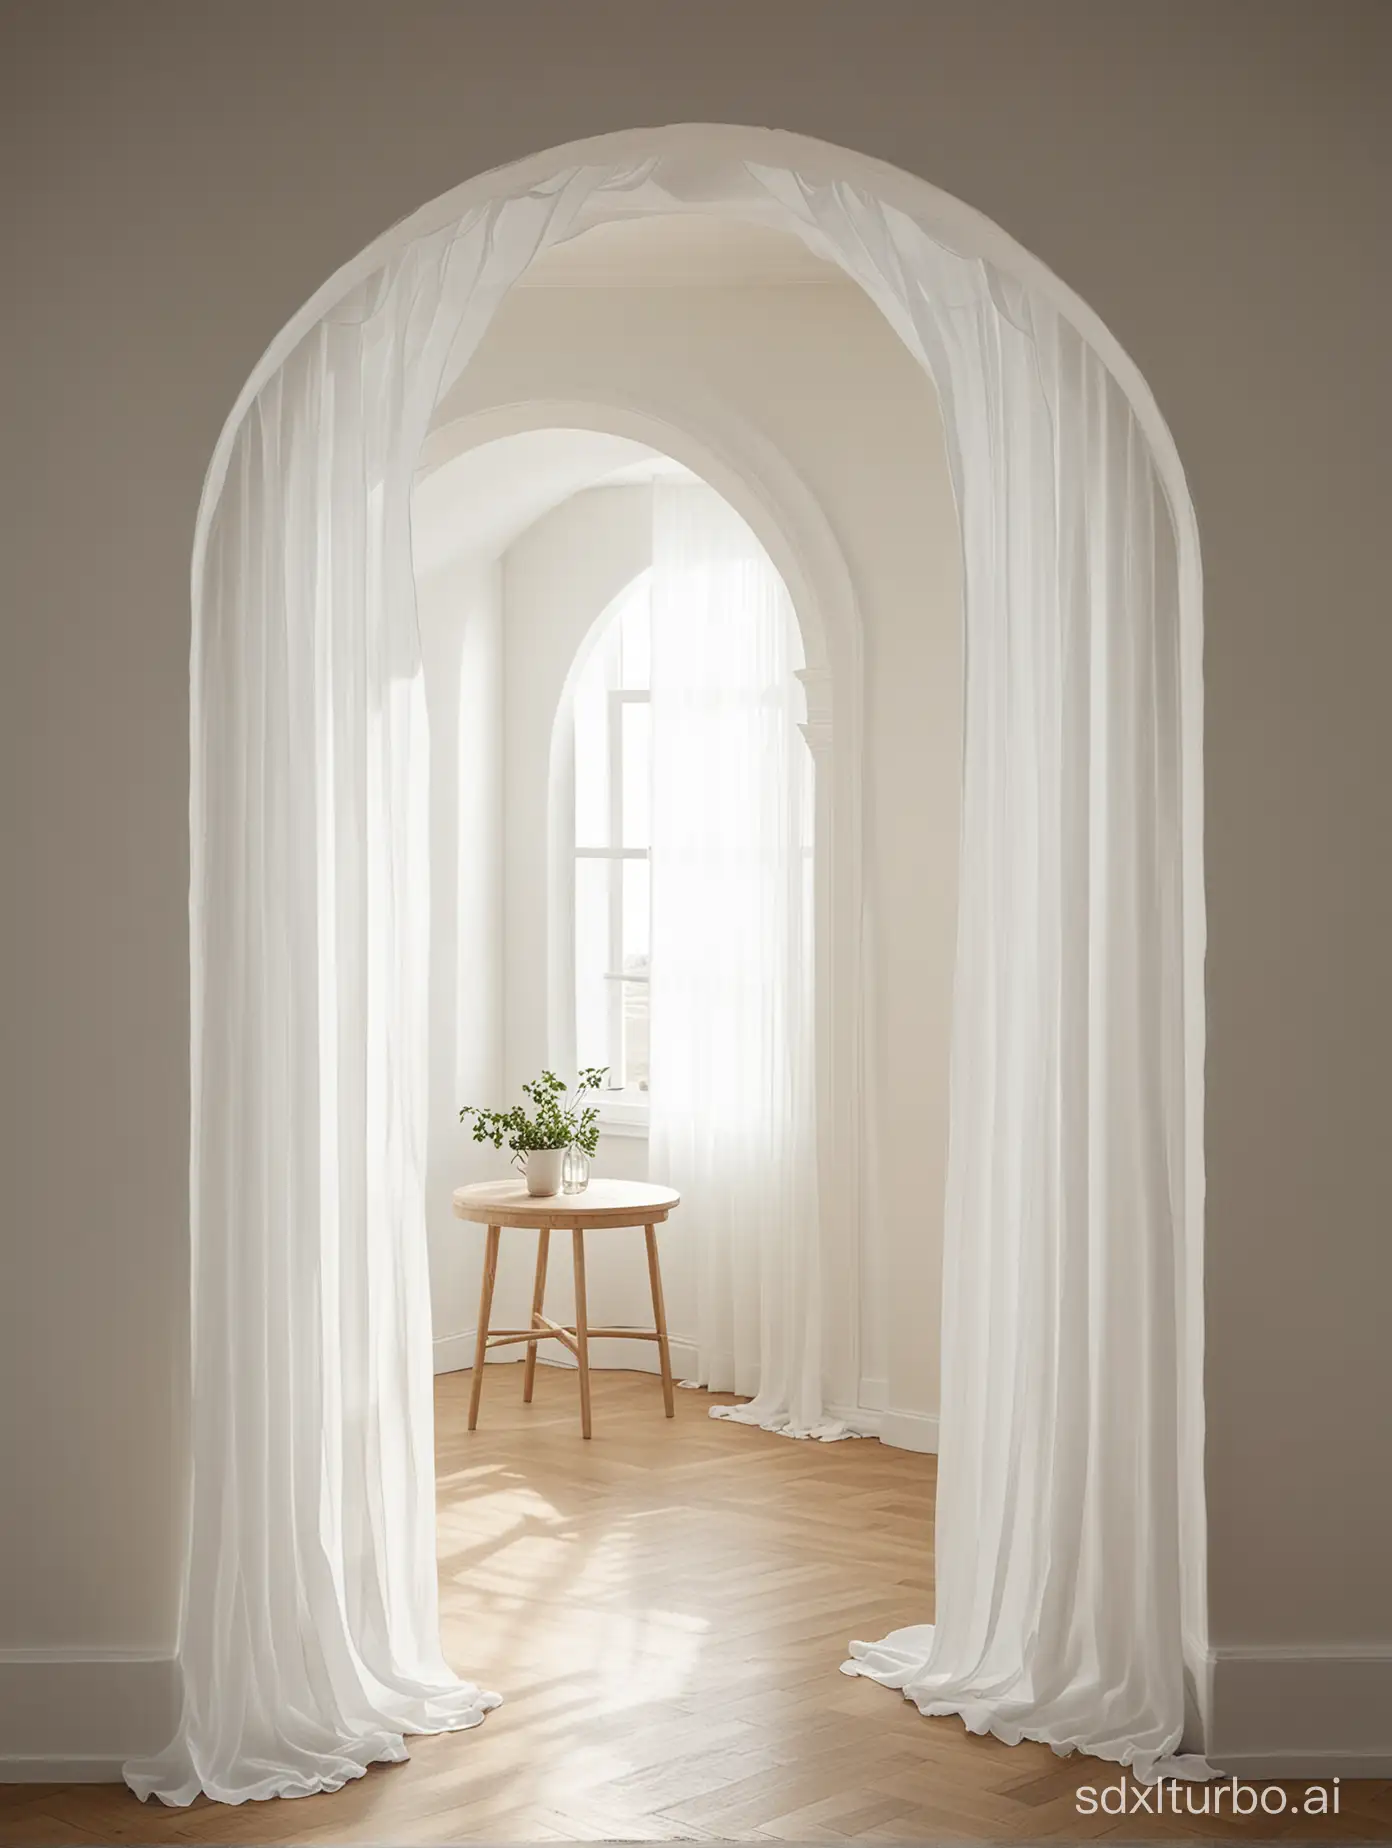 Light and shadow, a single archway, white gauze curtains